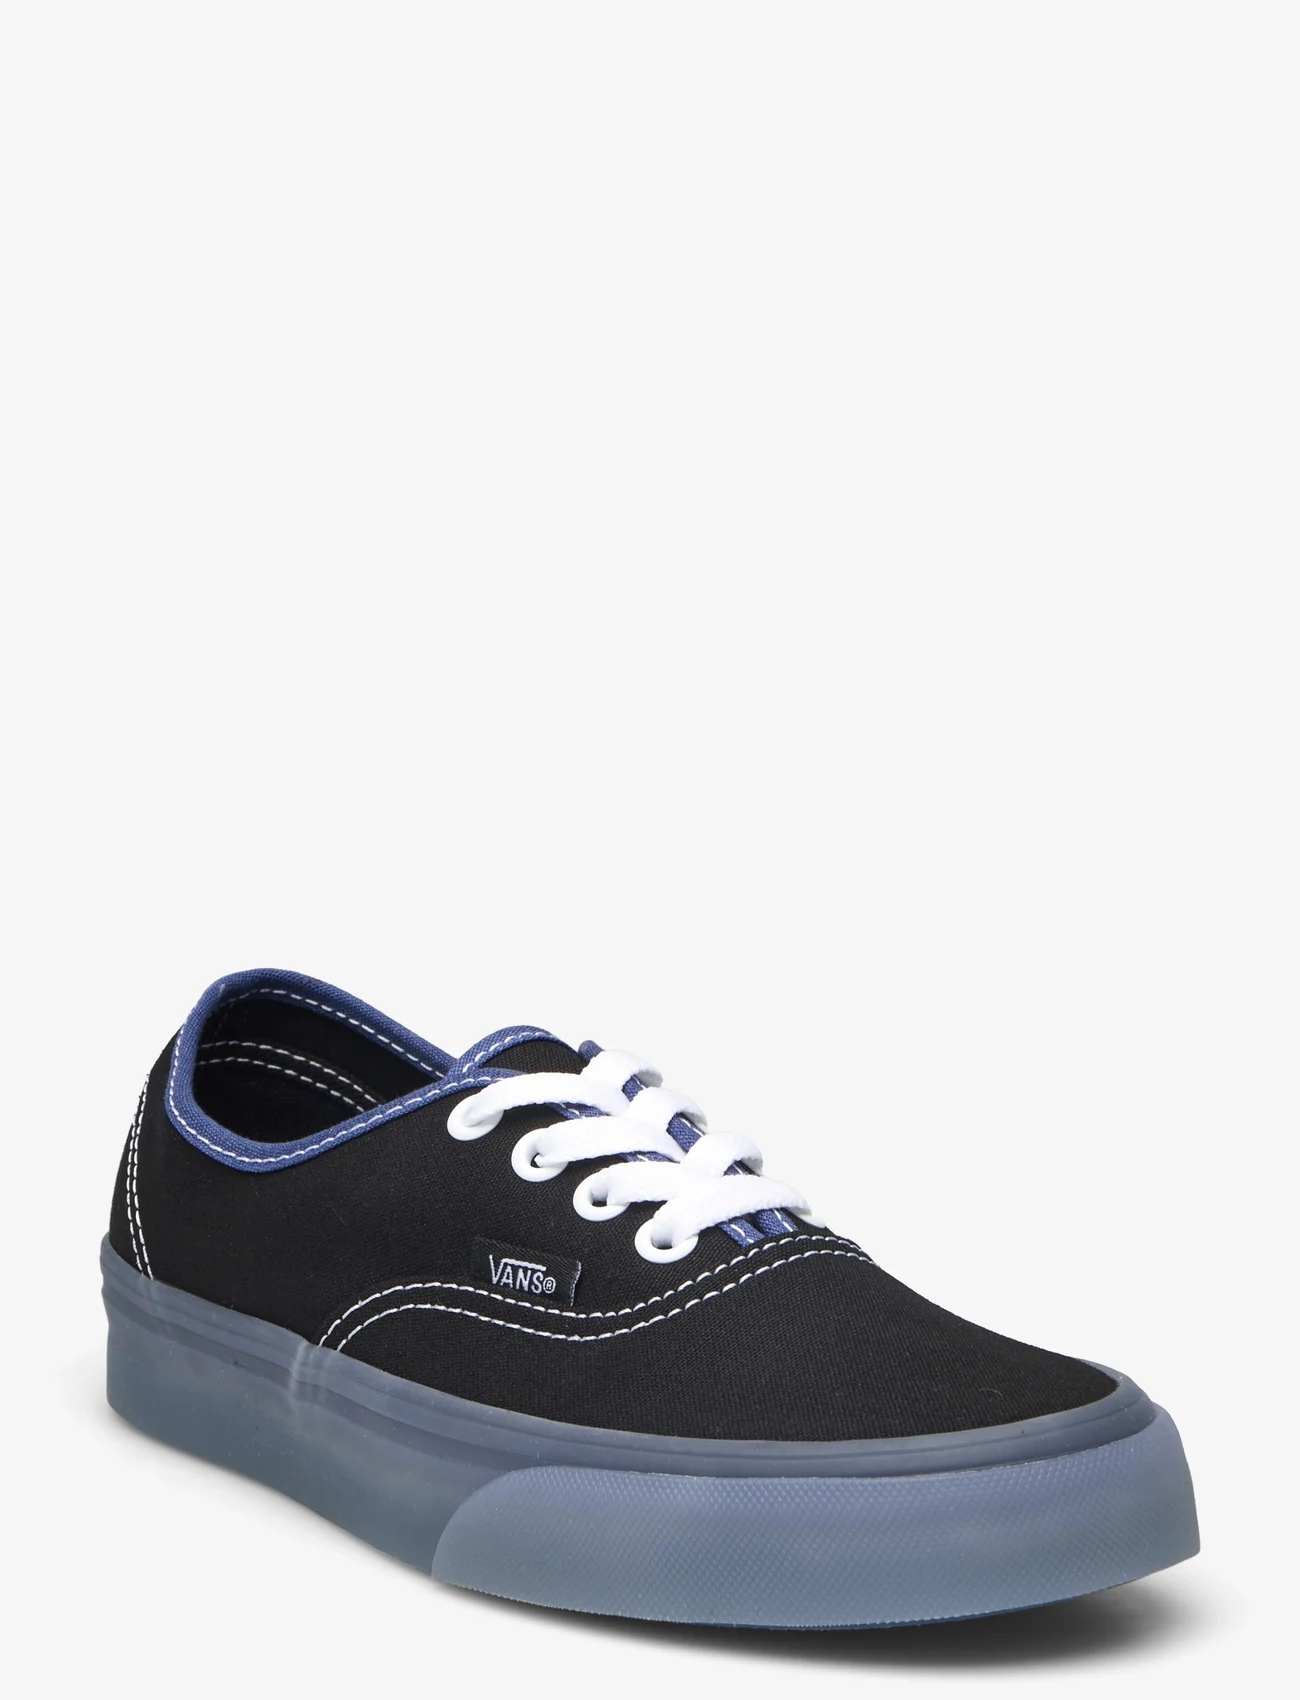 VANS - Authentic - laag sneakers - translucent sidewall black/blue - 0